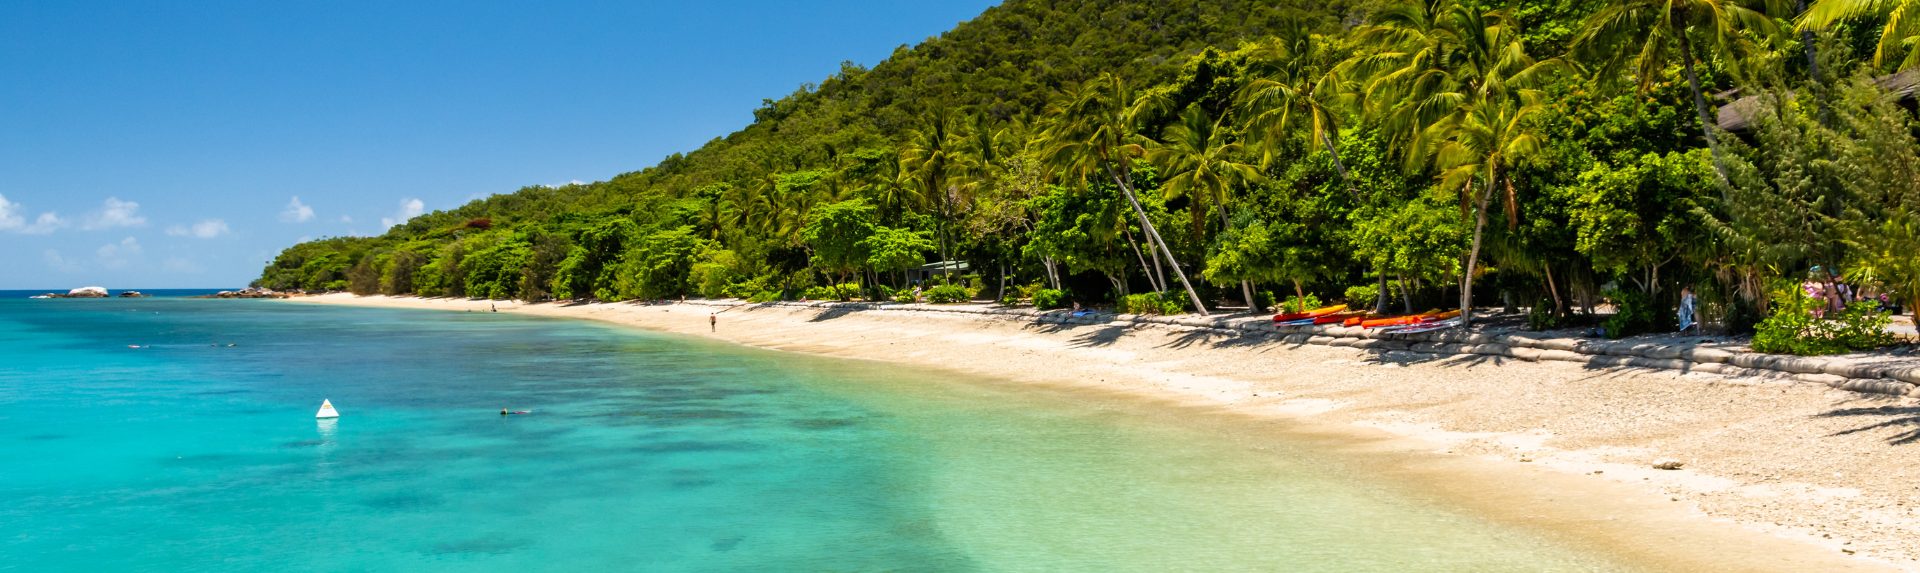 What is the best island to visit from Cairns?